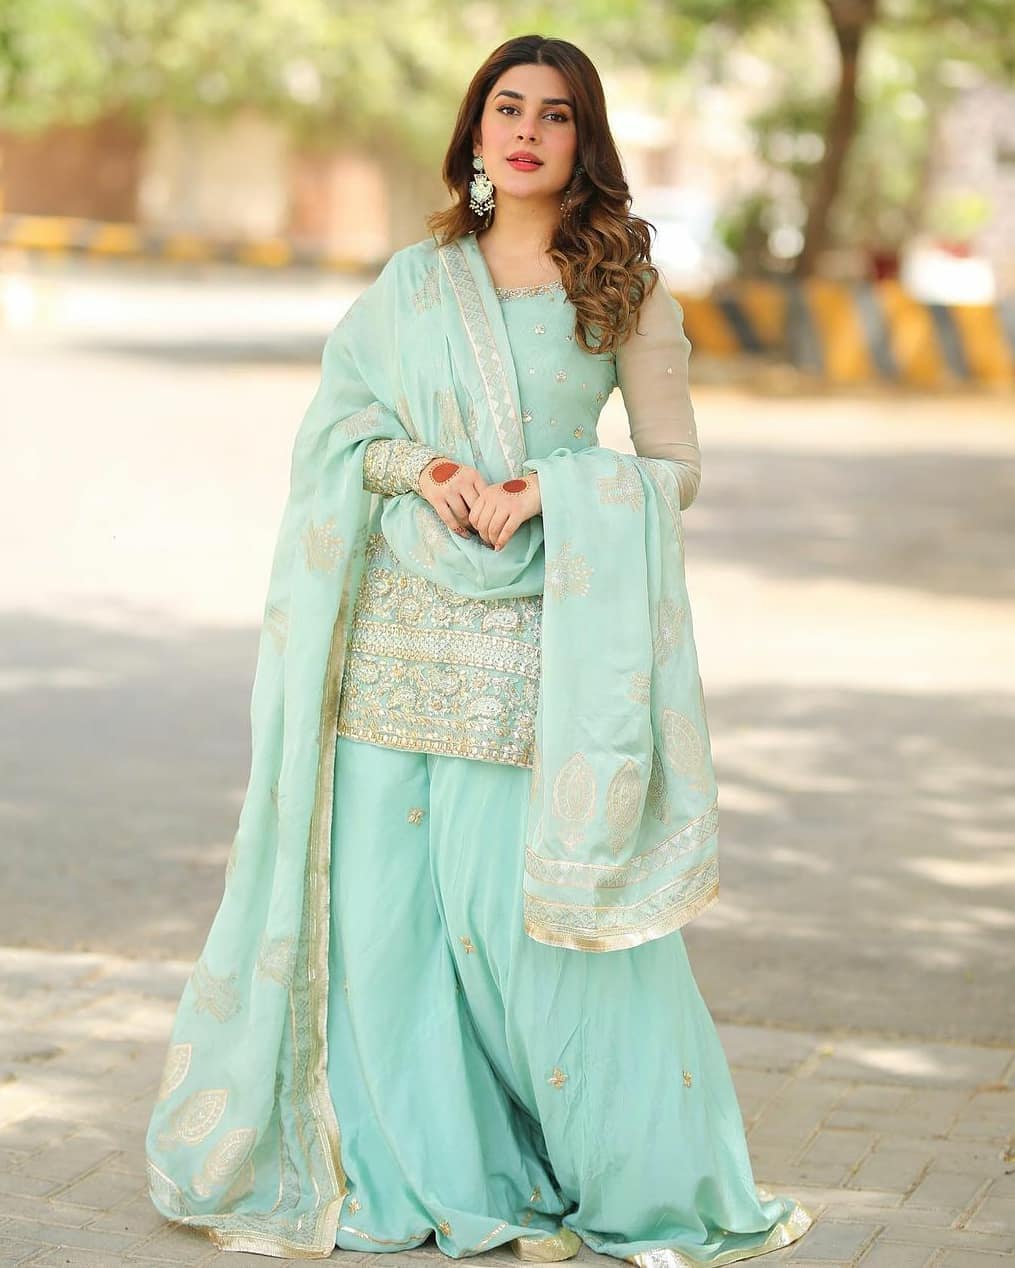 How to style your sharara suit this wedding season - Quora